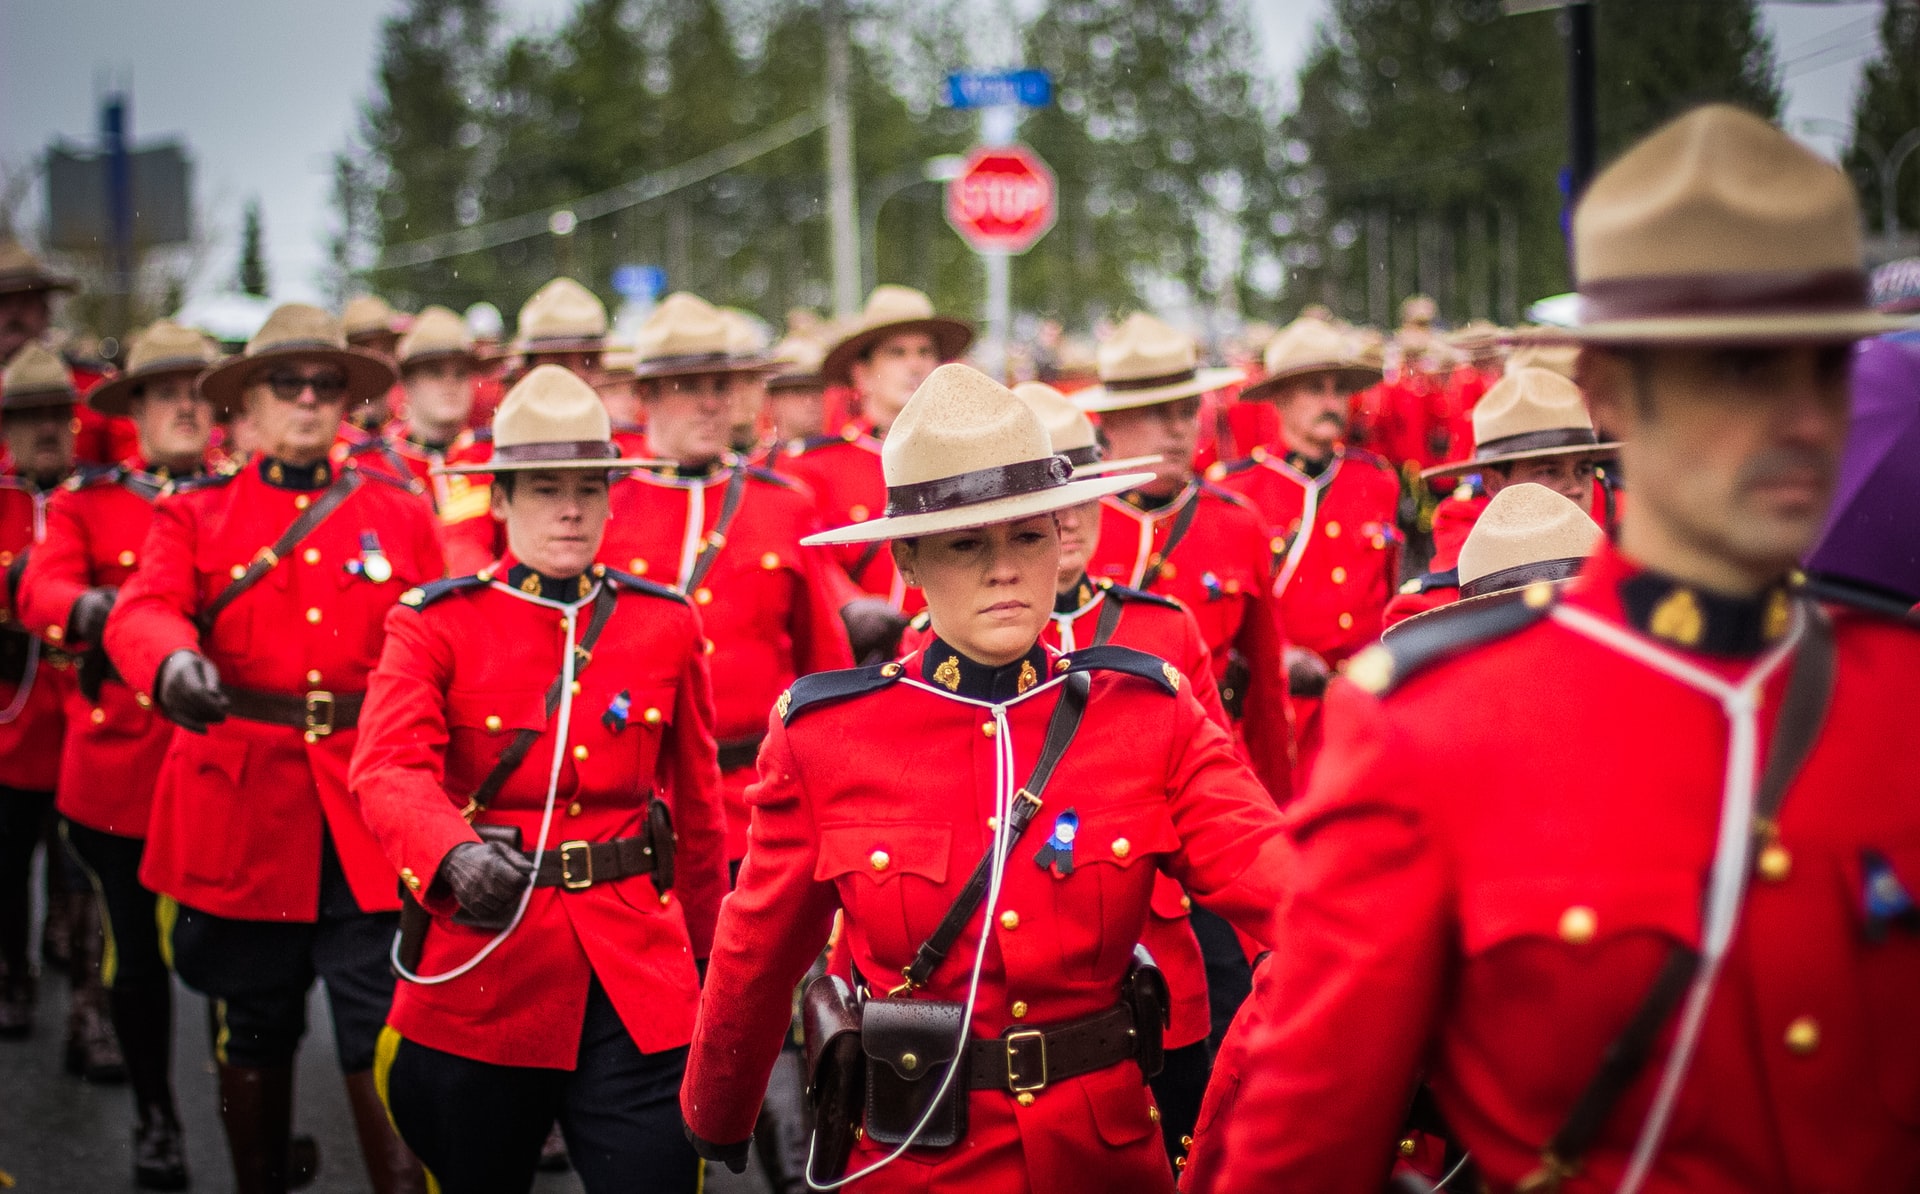 Canadian Royal Mounted Police